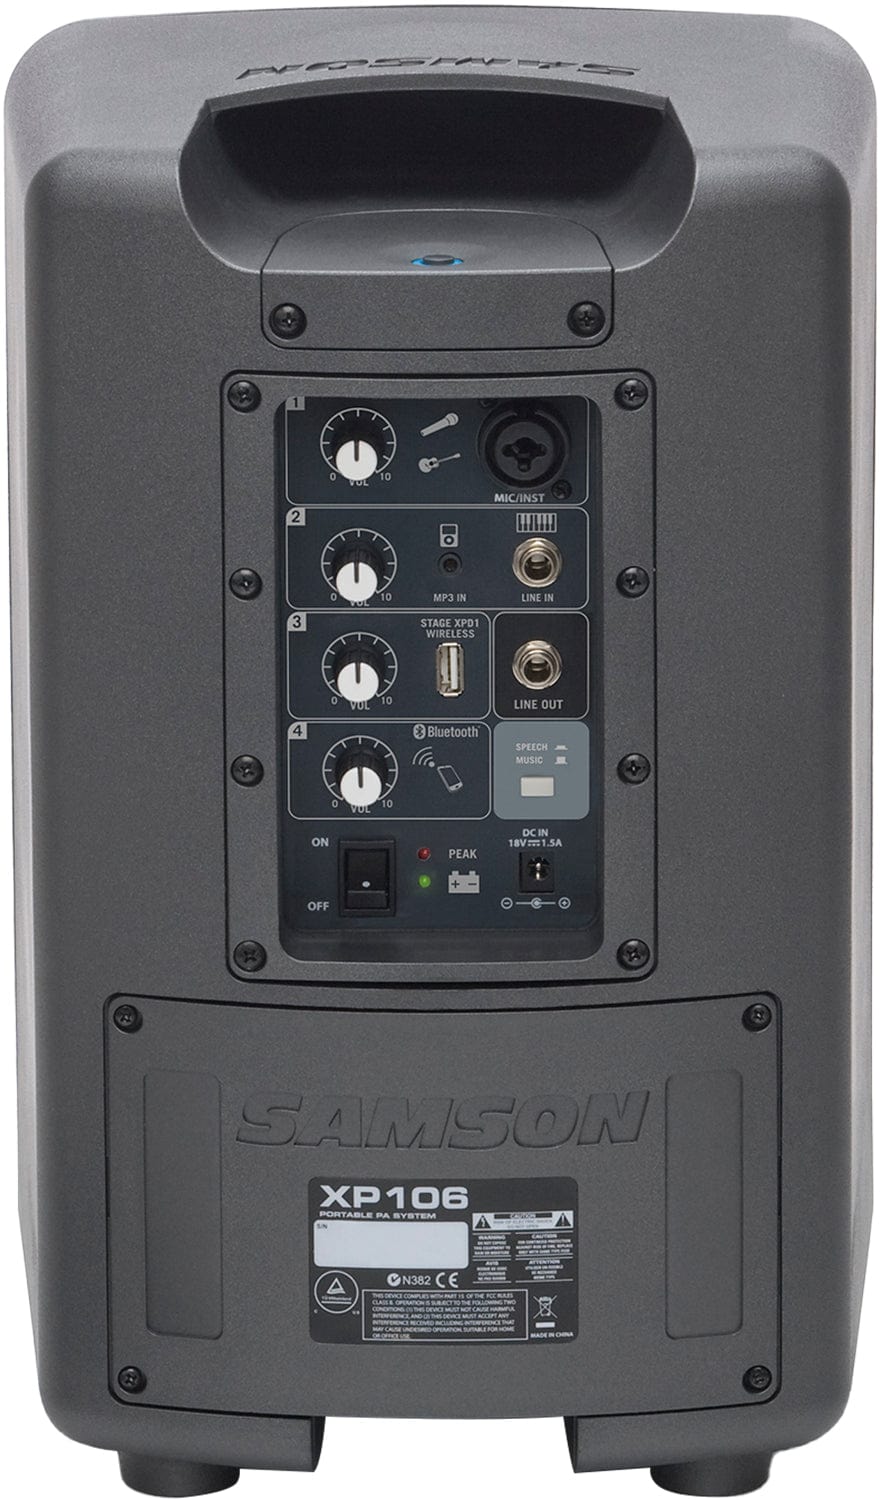 Samson SAXP106 Portable PA 100-Watts 2-Way 6-Inch Woofer w/ Bluetooth and Wired HH Mic - PSSL ProSound and Stage Lighting